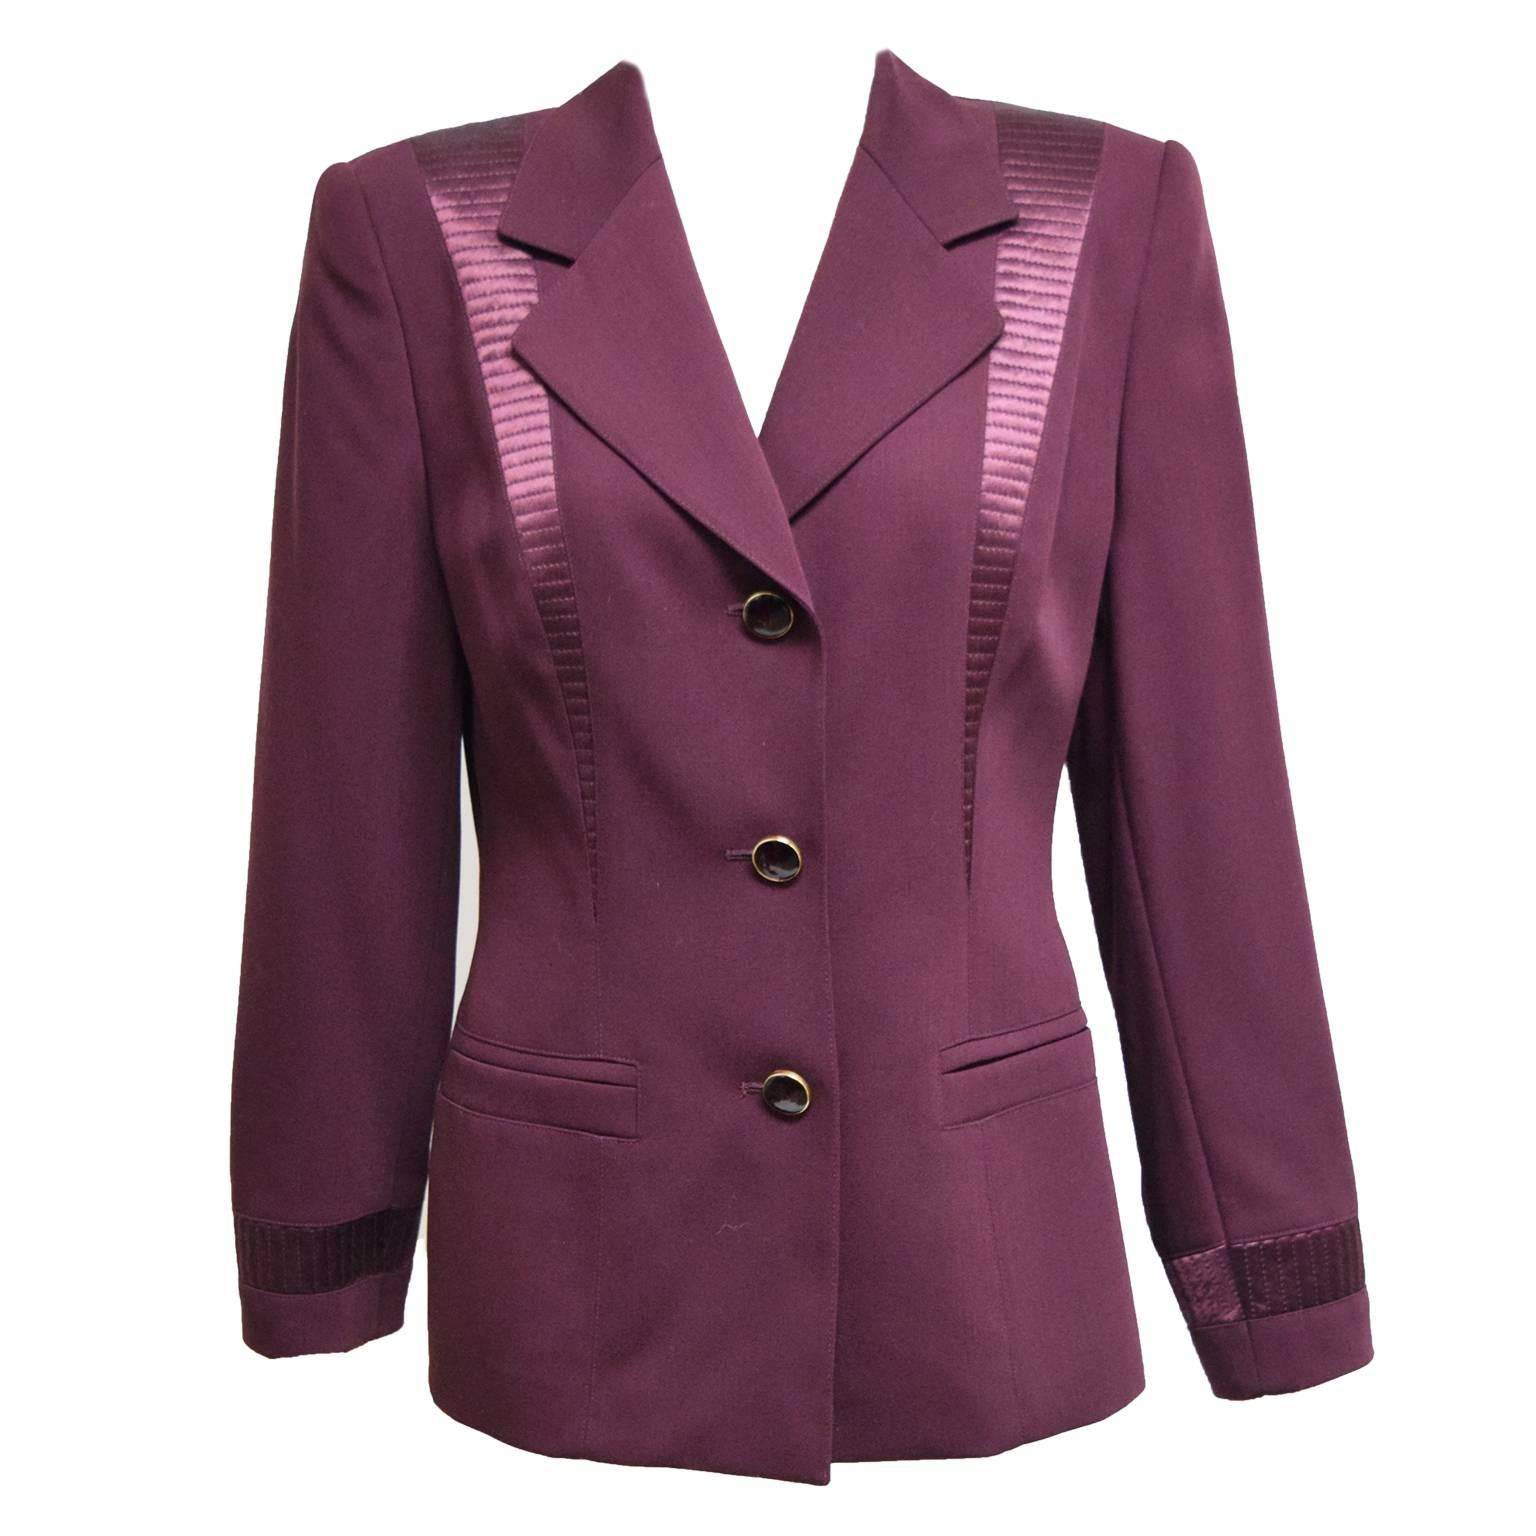 This vintage two piece skirt suit by Escada is a classic. It is made of a merlot wool and lame silk. The skirt is a knife pleated skirt with alternating silk and wool panels. The jacket is fully lined in silk and has ruby jewel like stone button